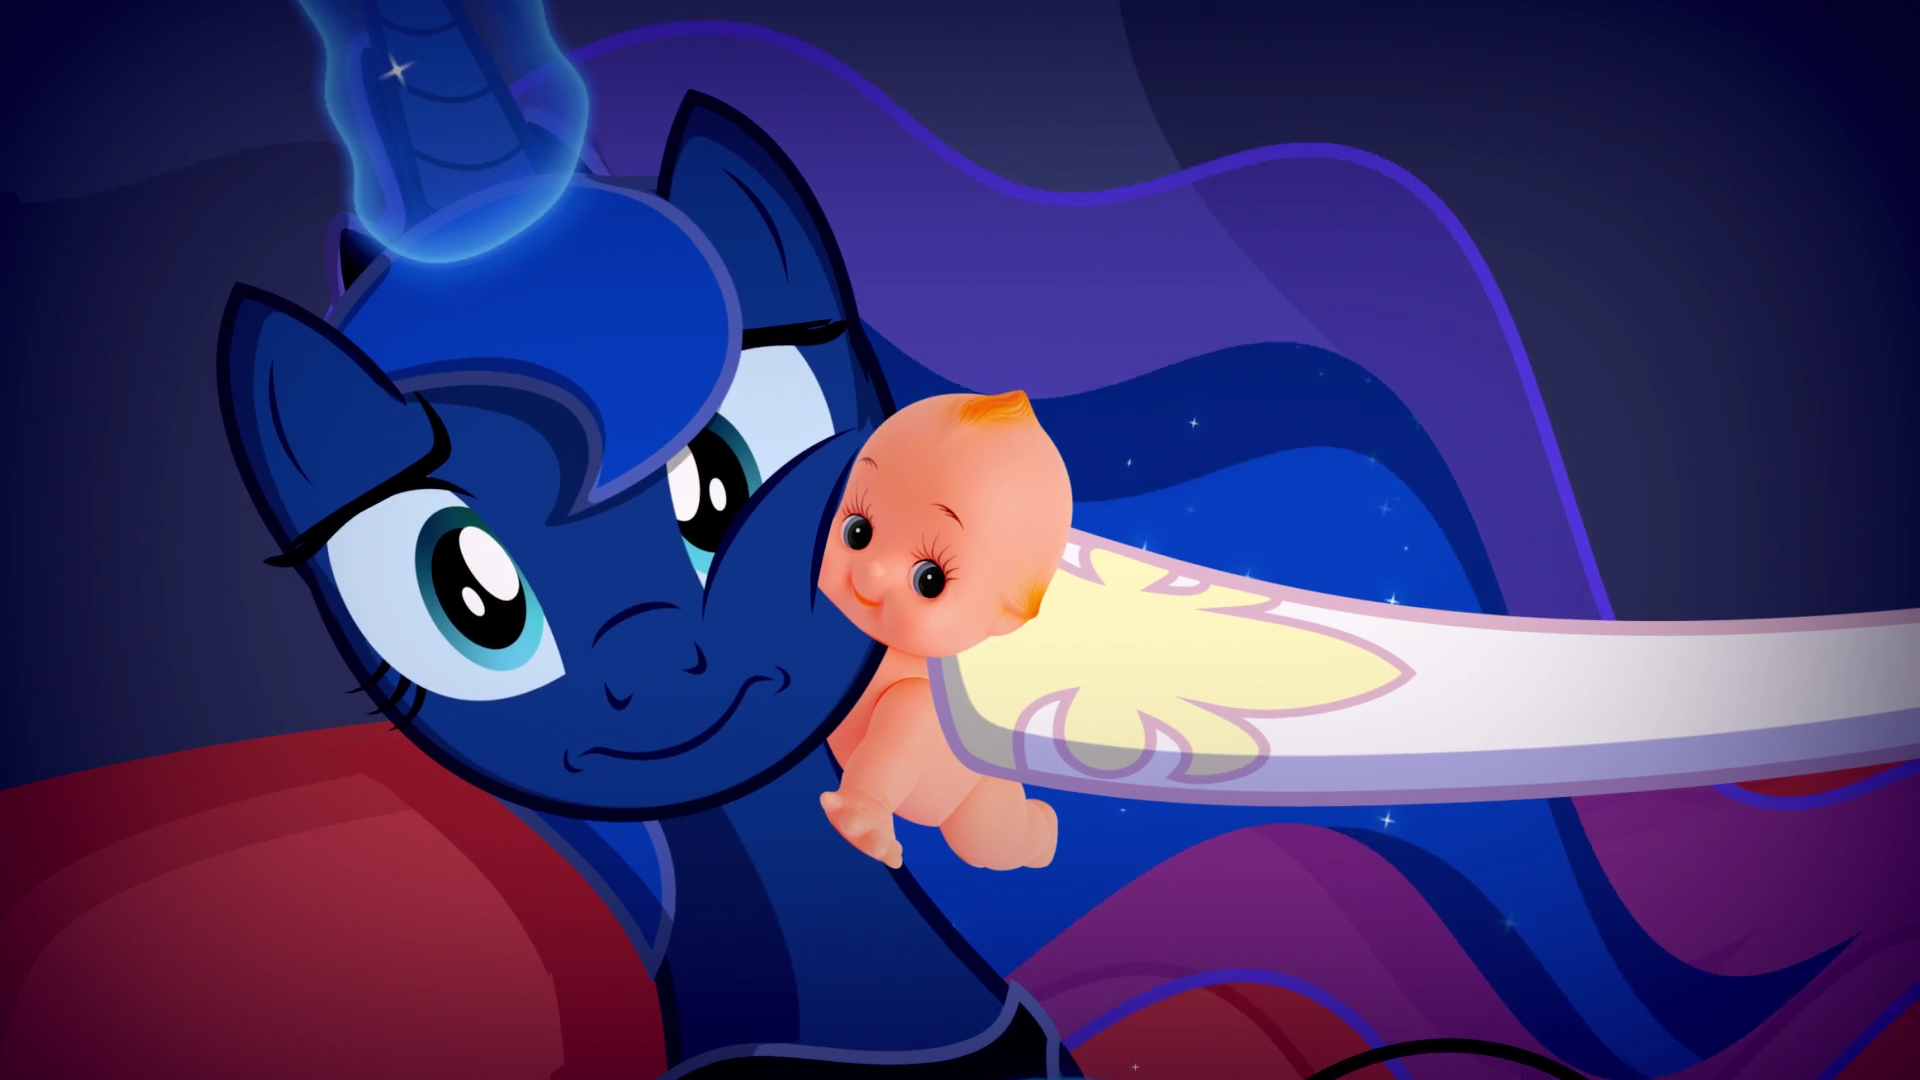 Save the baby. My Little Pony: Friendship is Magic